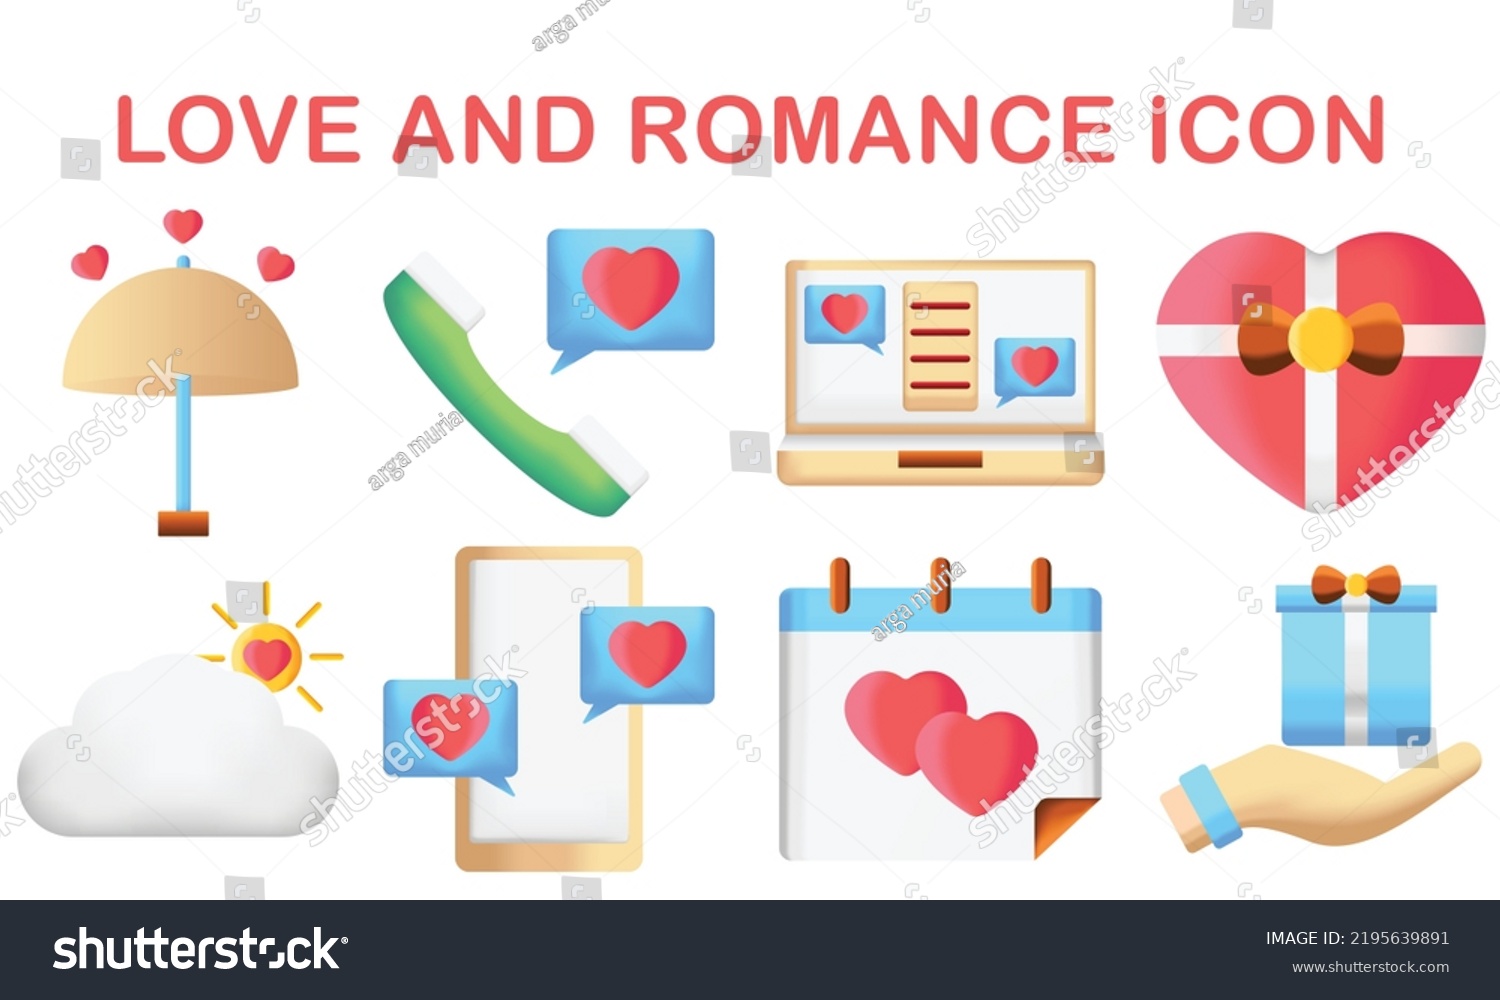 SVG of love and romance simple 3d icons set. such as gift, chat, love message, date and more. Vector illustration for modern concept, ui or ux kit, web graphics and application. EPS 10 ready convert to SVG. svg